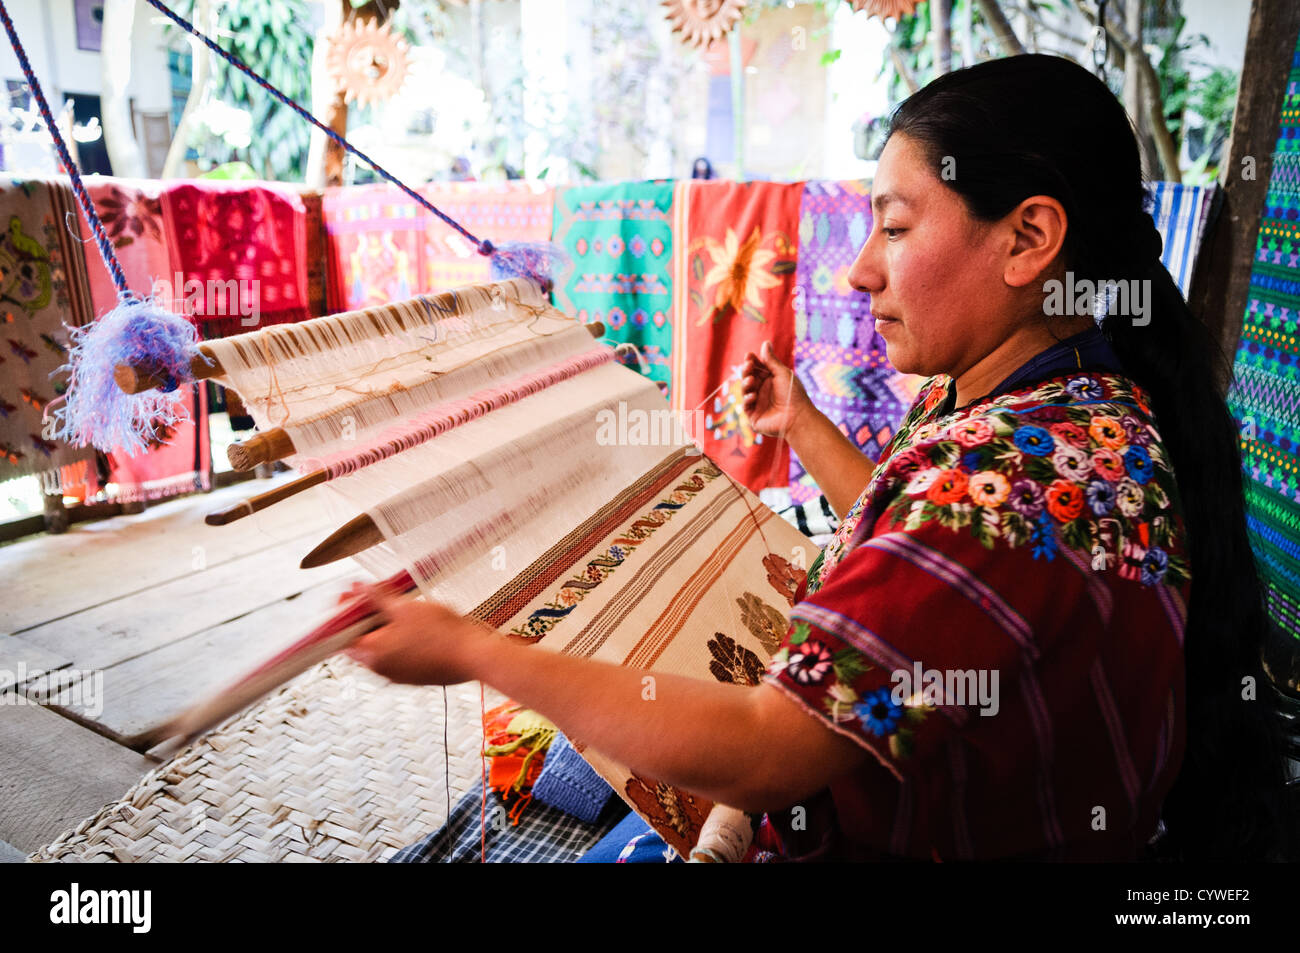 Woman using a traditional loom at Casa del Tejido Antiguo, an indigenous textile museum and market in Antigua, Guatemala Stock Photo